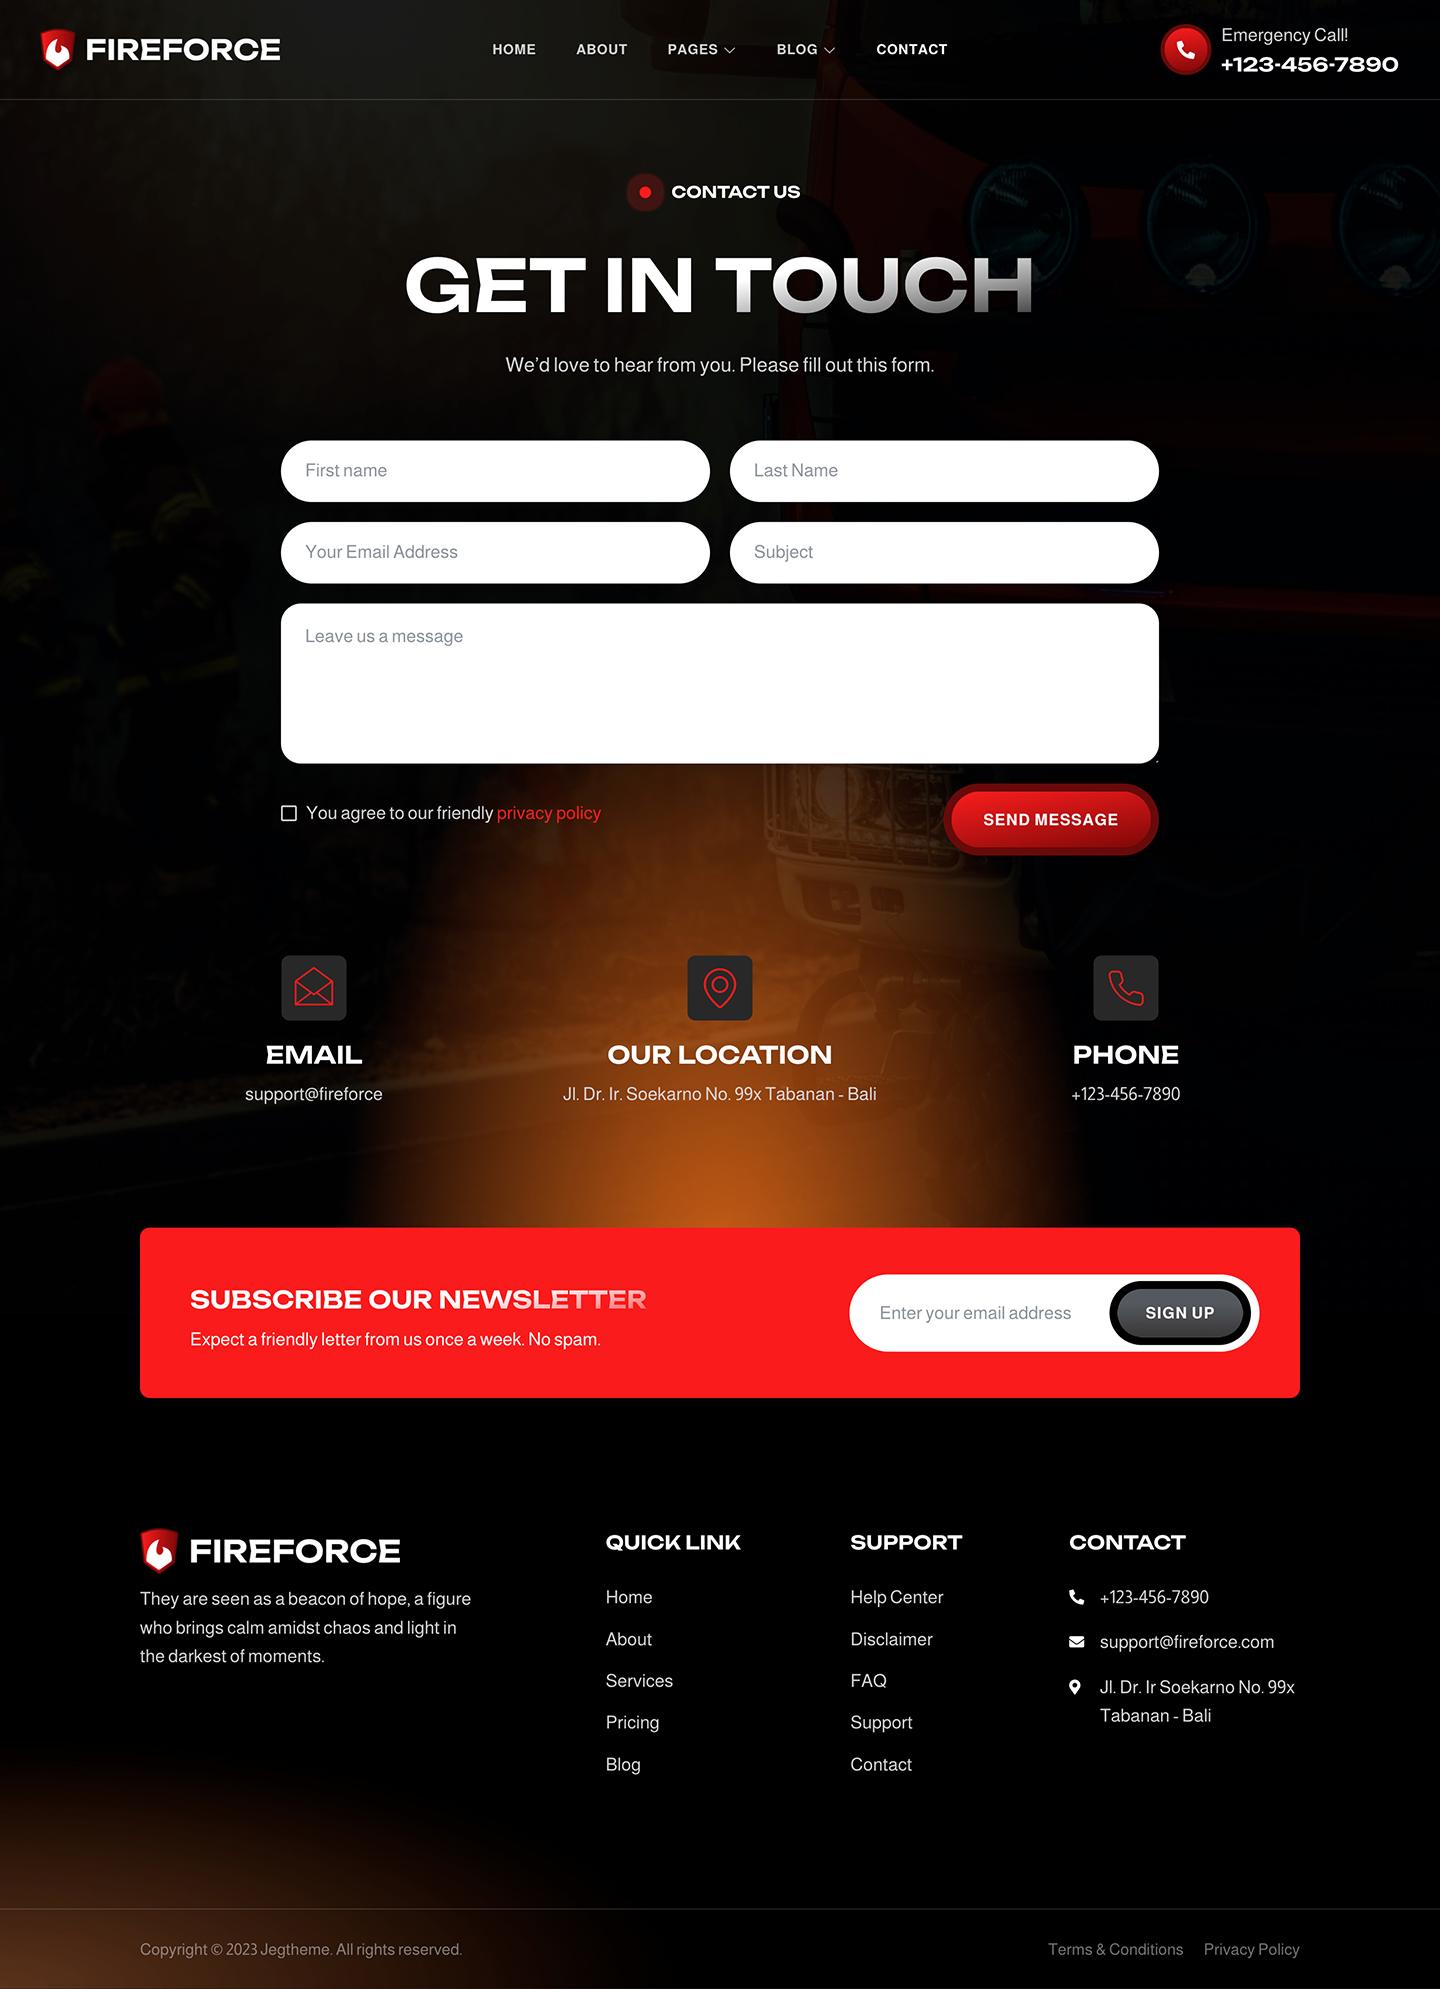 Fireforce designs, themes, templates and downloadable graphic